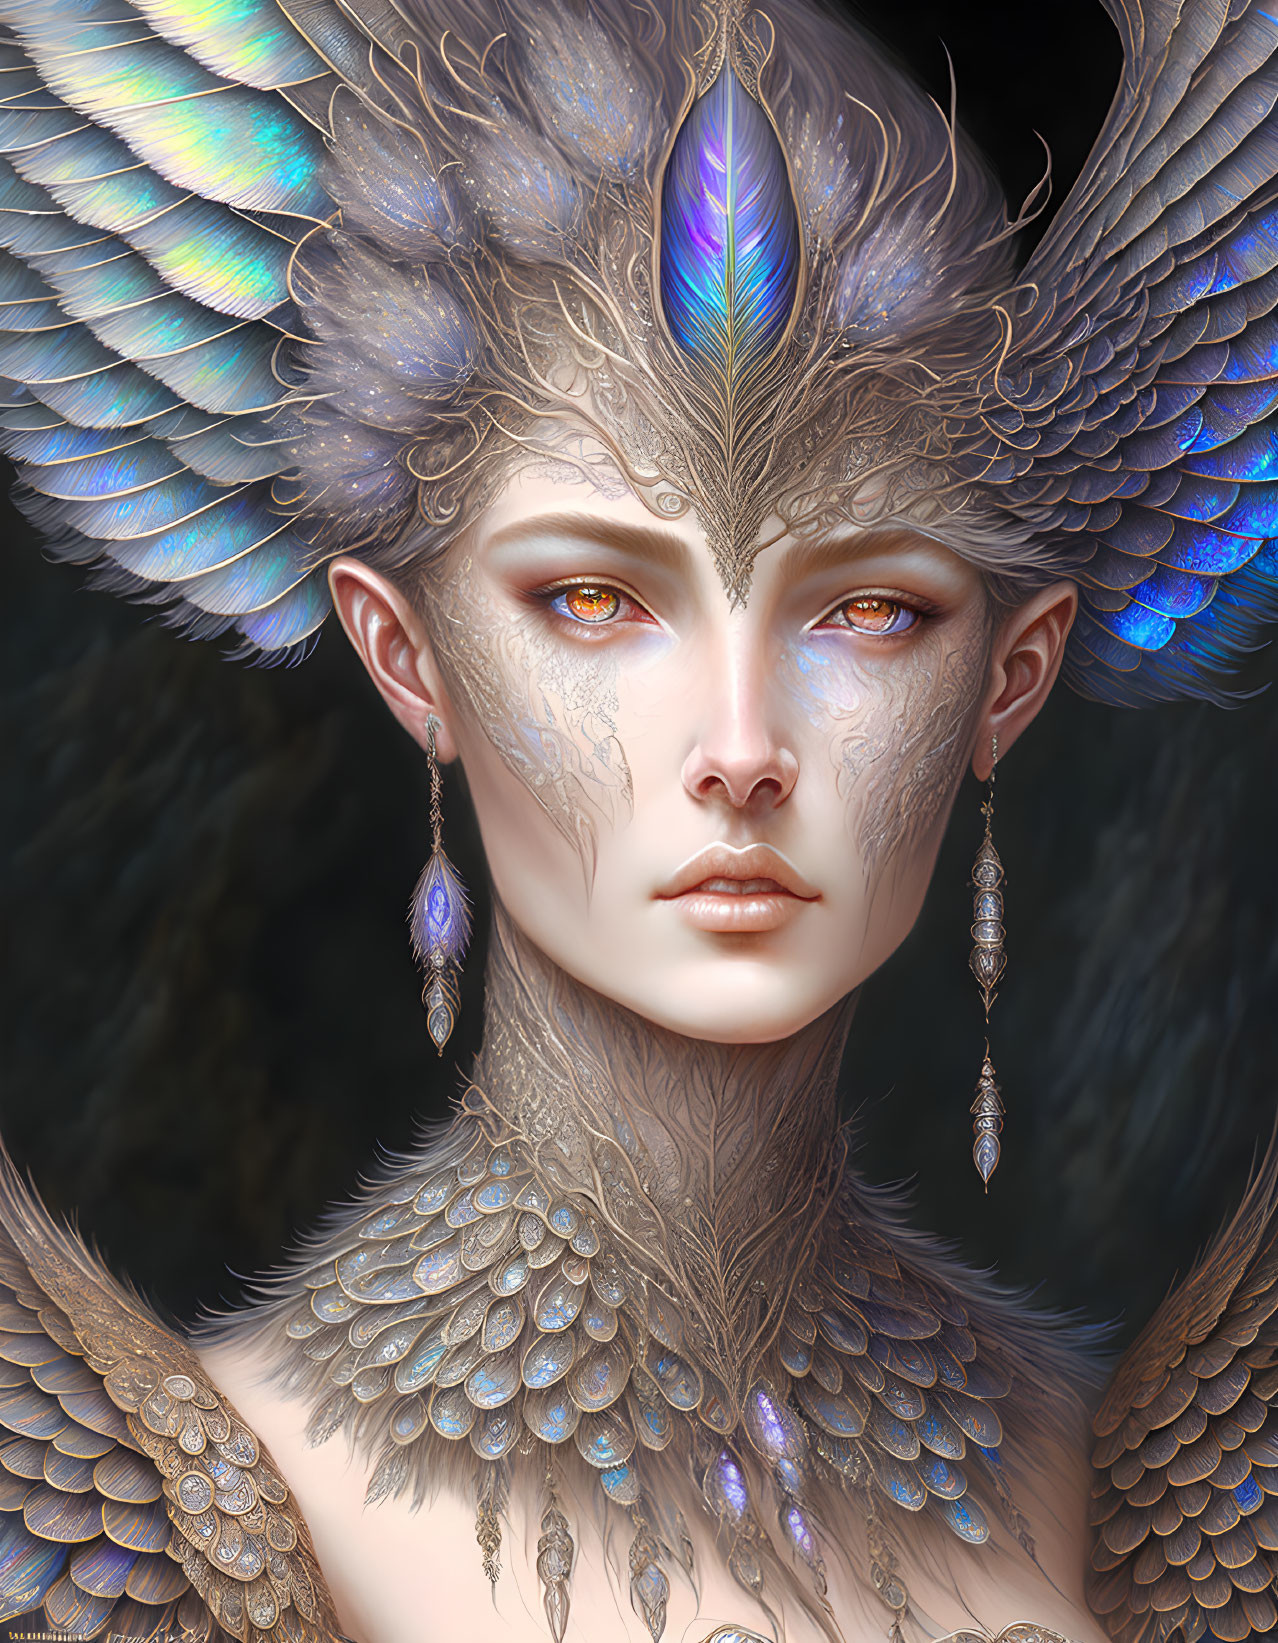 Fantasy portrait featuring feathered headdress, metallic skin patterns, iridescent wings, and captivating